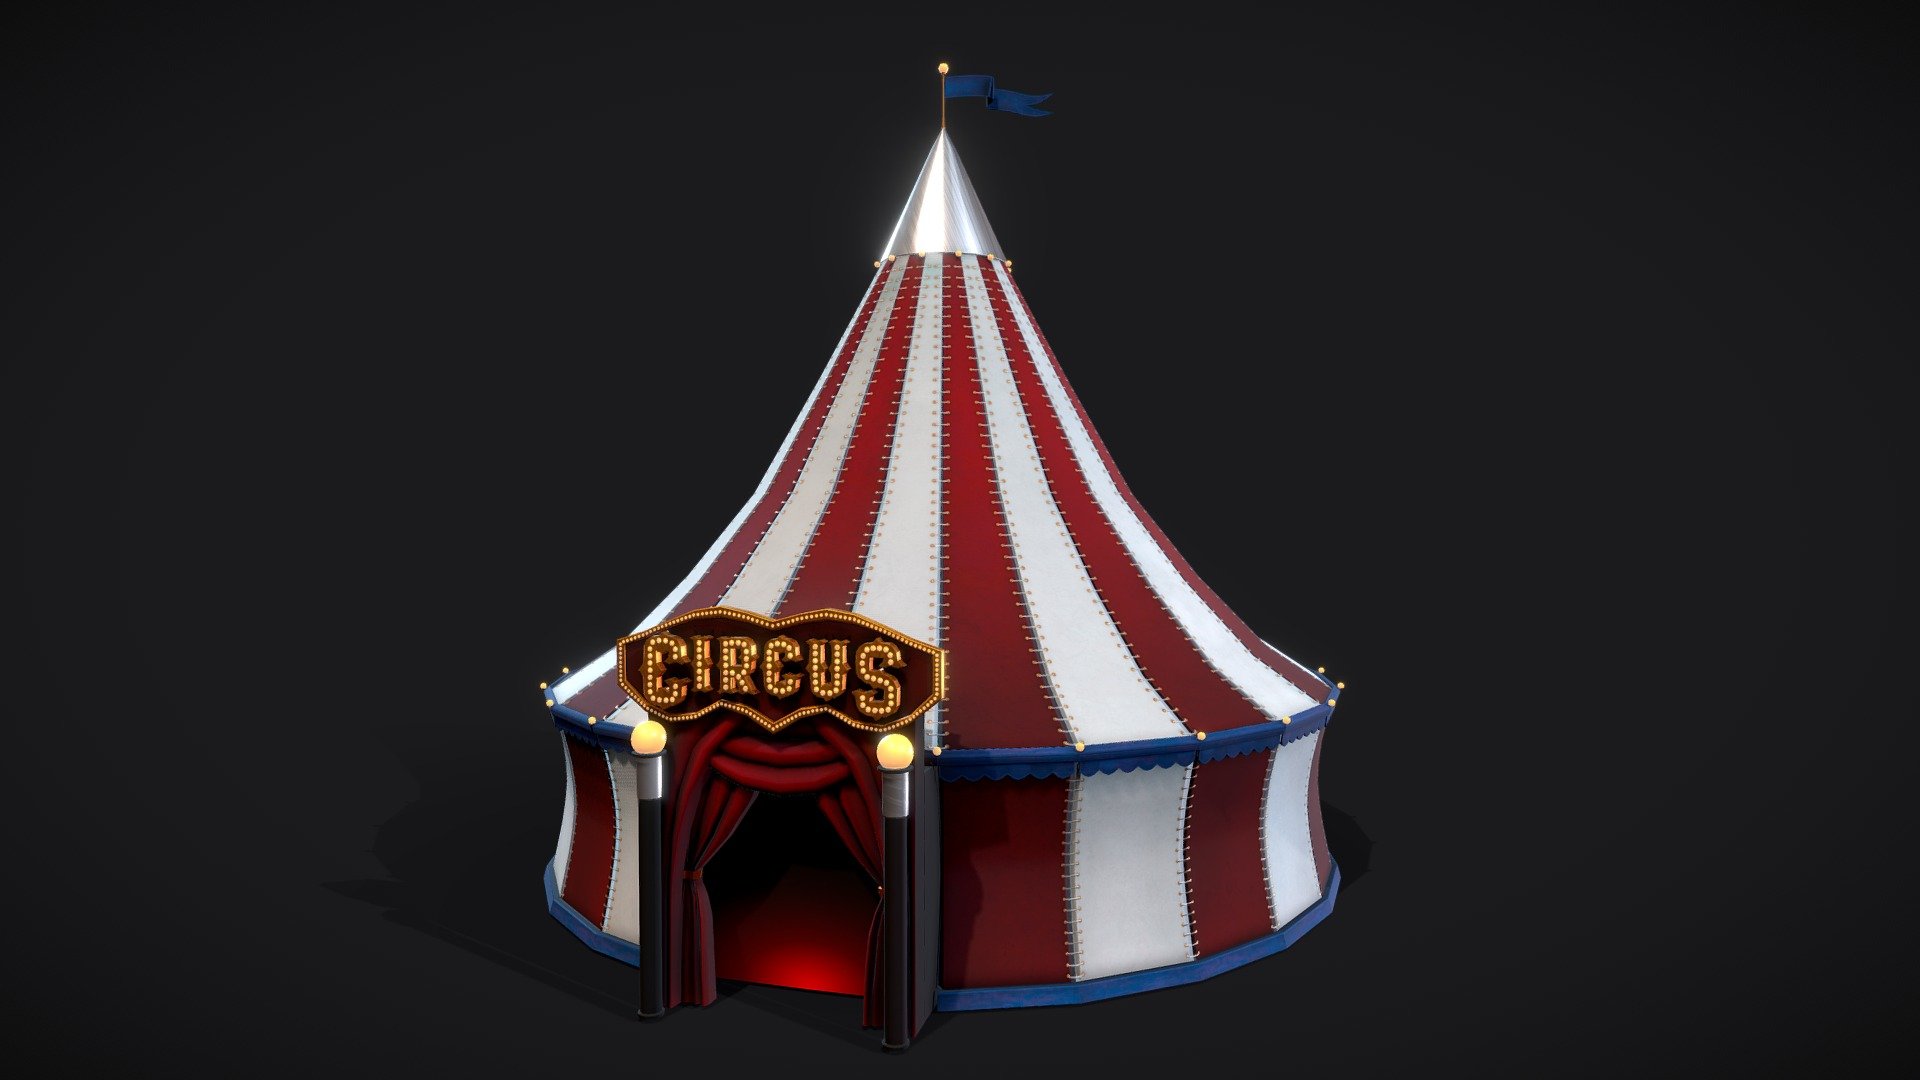 Circus Tent game-ready model. 
Optimized low poly. 
PBR Metal-Roughness.

Non-overlapping UVs. 
Real-World Scale. 
Easy on performance

The archive contains the following files:




.MA file (original MAYA file, version 2022)

FBX file

OBJ 

Texture set (available in 4096*4096)




Circus_BaseColor

Circus_Normal

Circus_Metalness

Circus_Roughness

Circus_AO

Circus_Emission

If you have any additional questions or any problems related to the model, kindly contact me: katy.b2802@gmail.com - Stylized Circus Tent - Buy Royalty Free 3D model by Enkarra 3d model